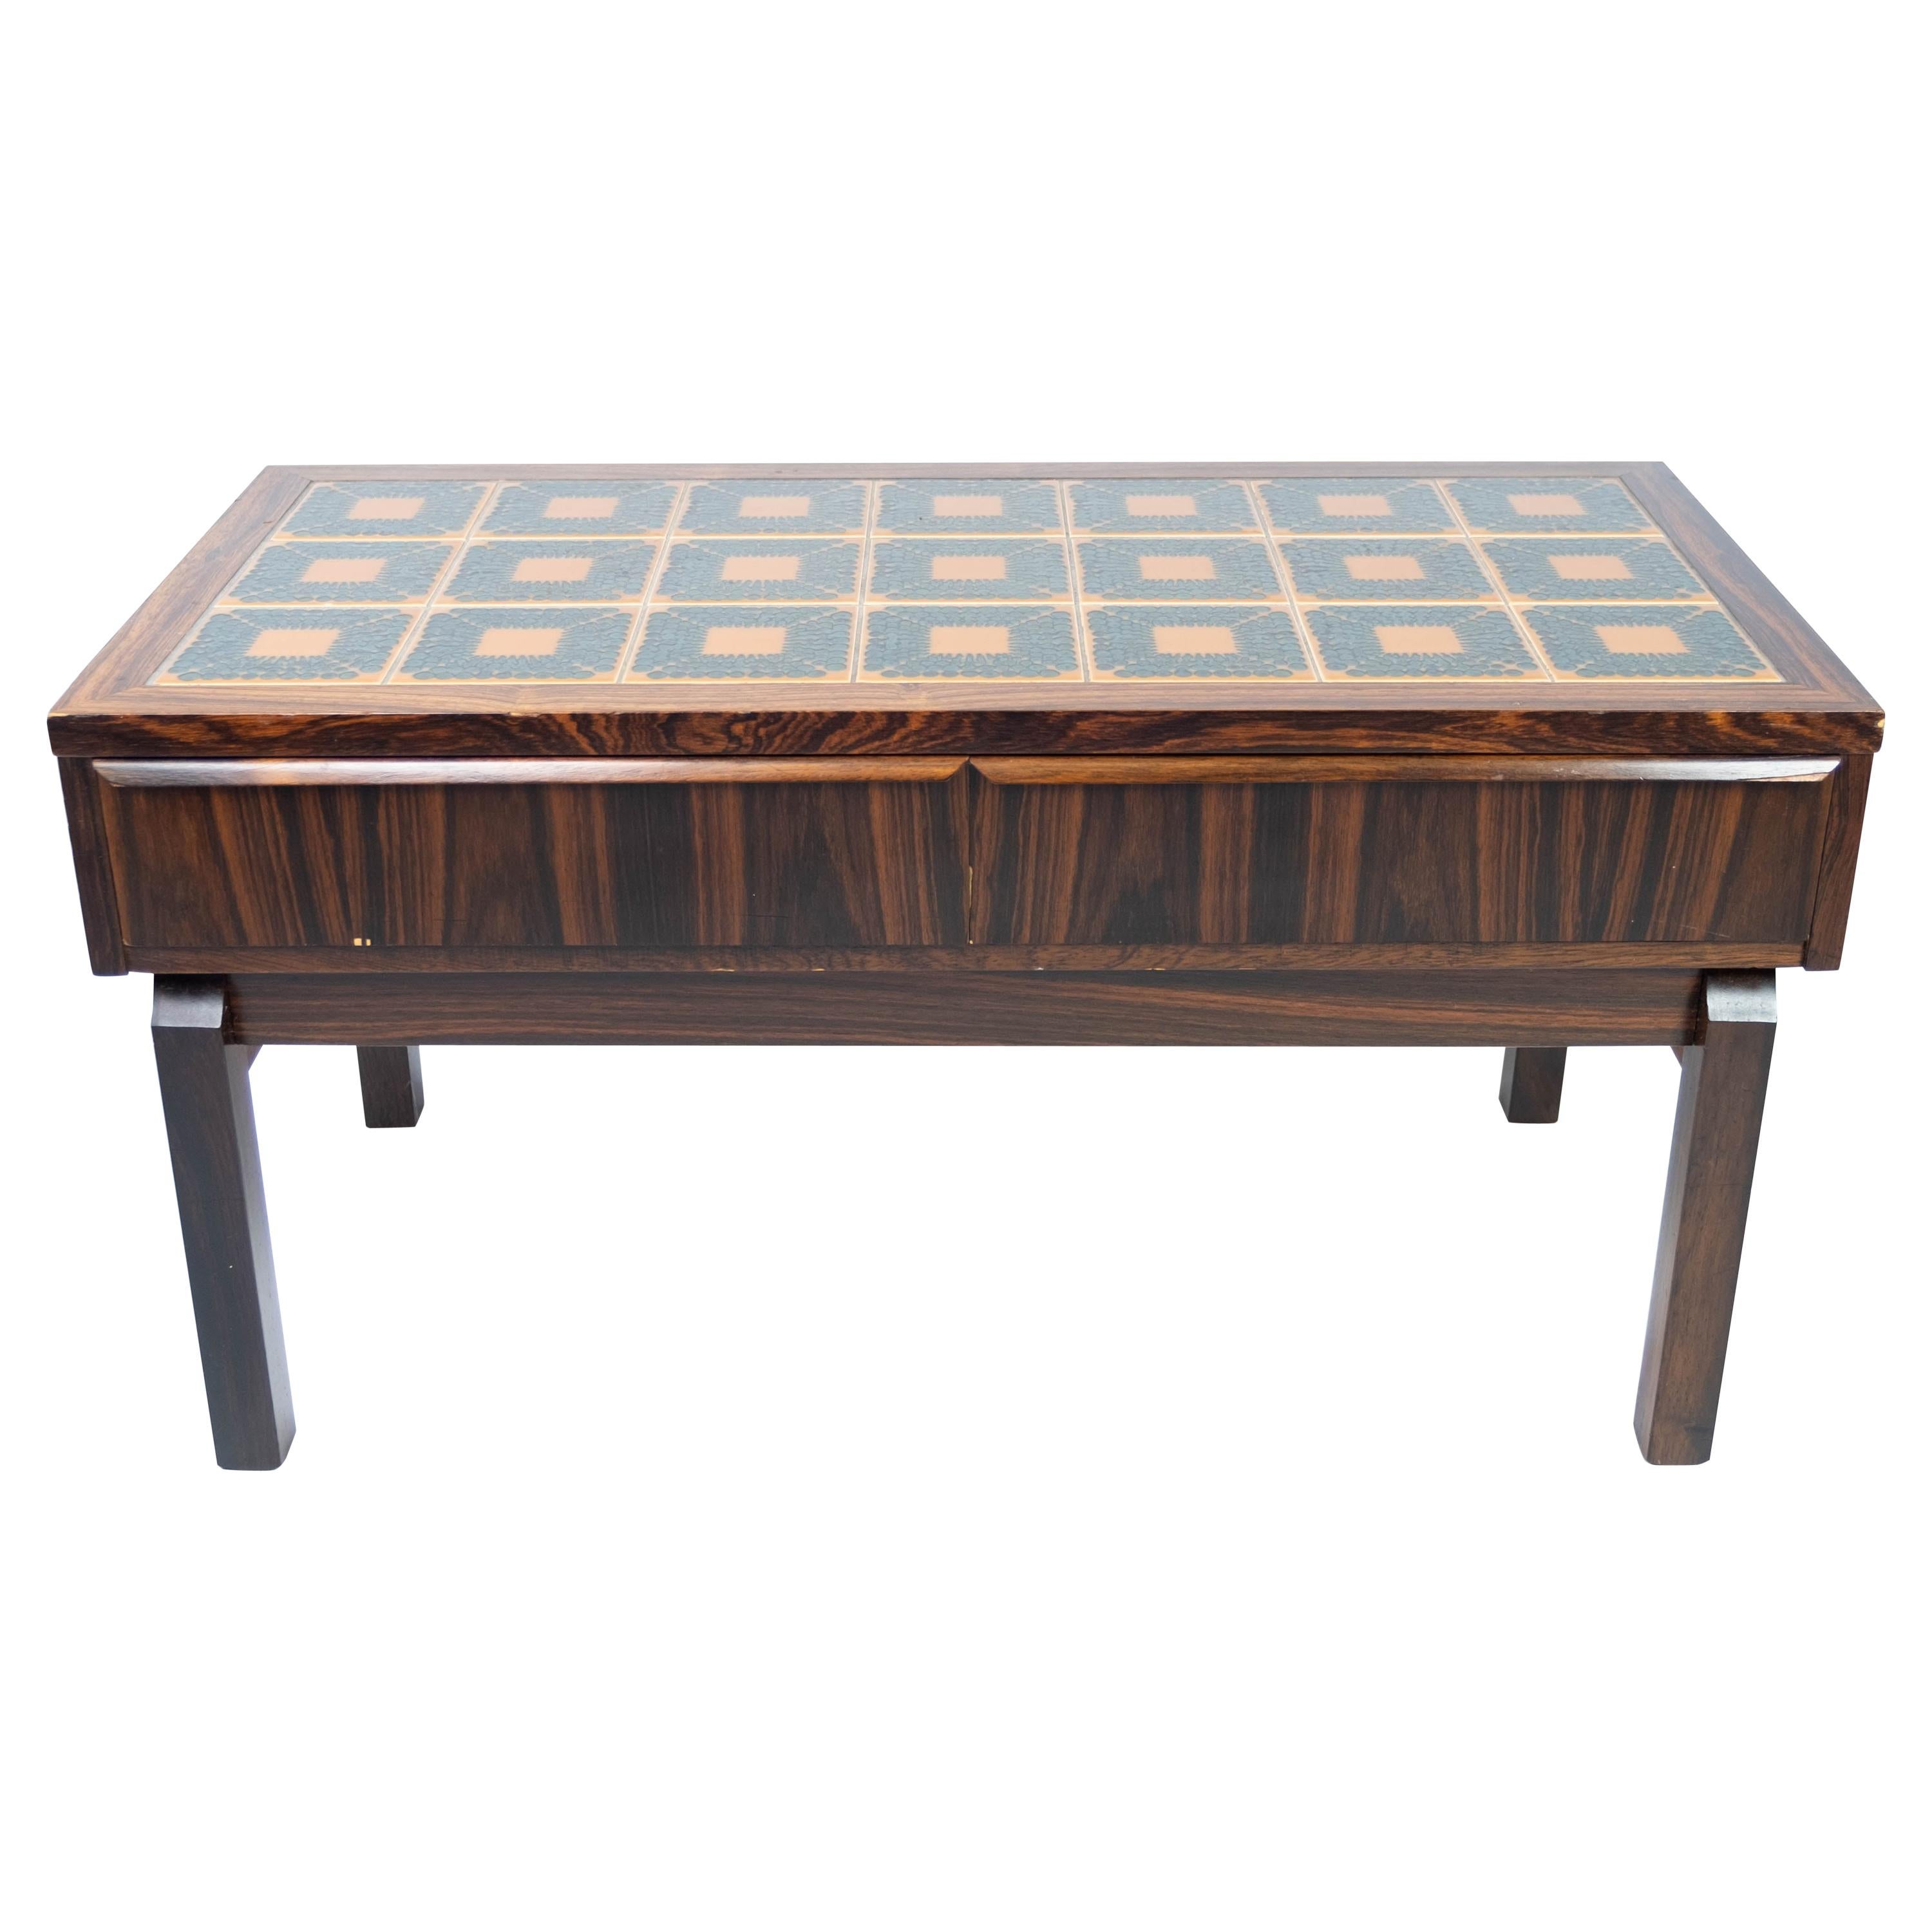 Low Chest in Rosewood and Tiles, of Danish Design from the 1960s For Sale